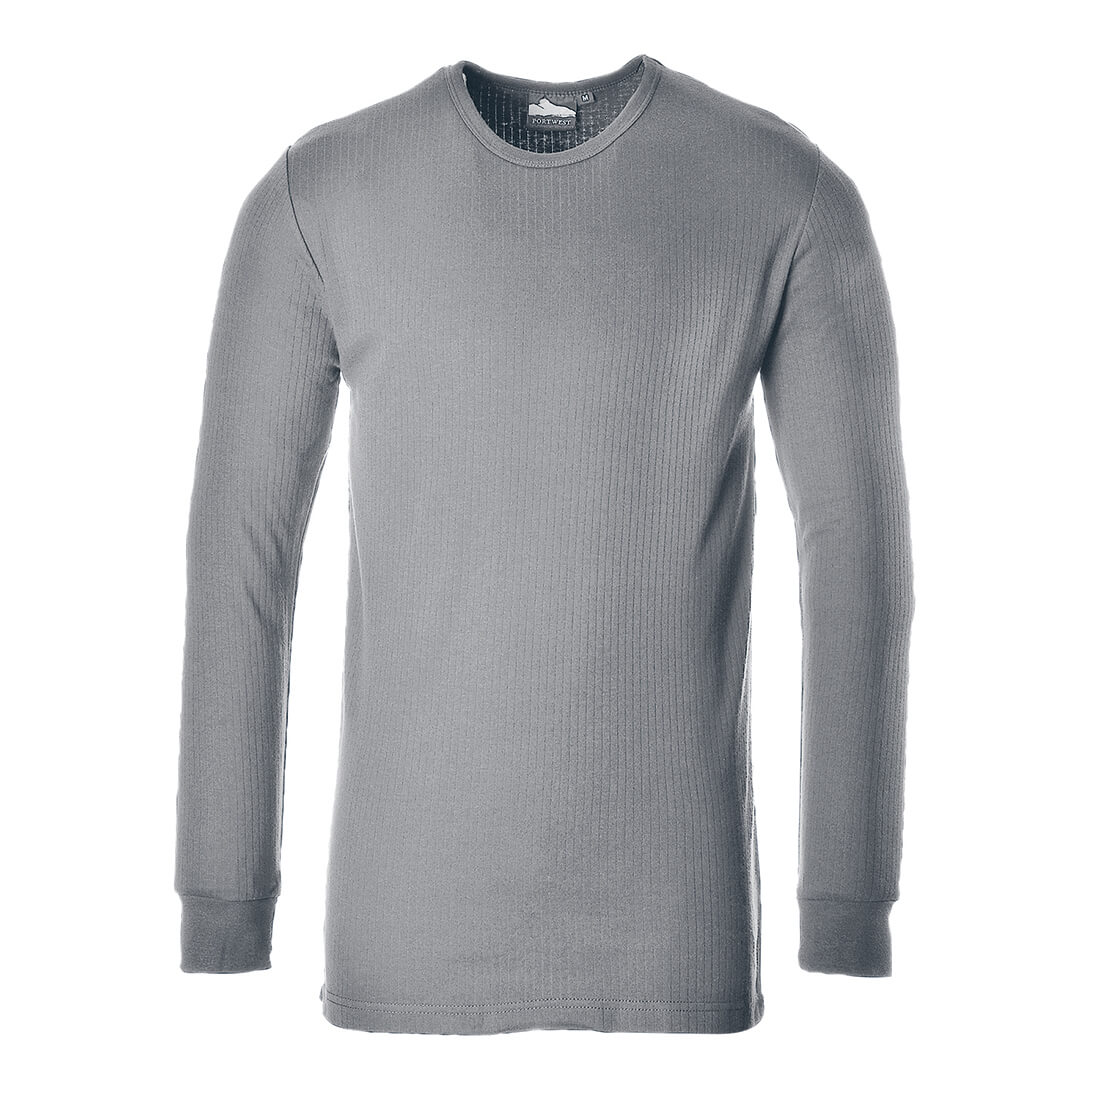 Image of Portwest Thermal Long Sleeve T Shirt Grey L